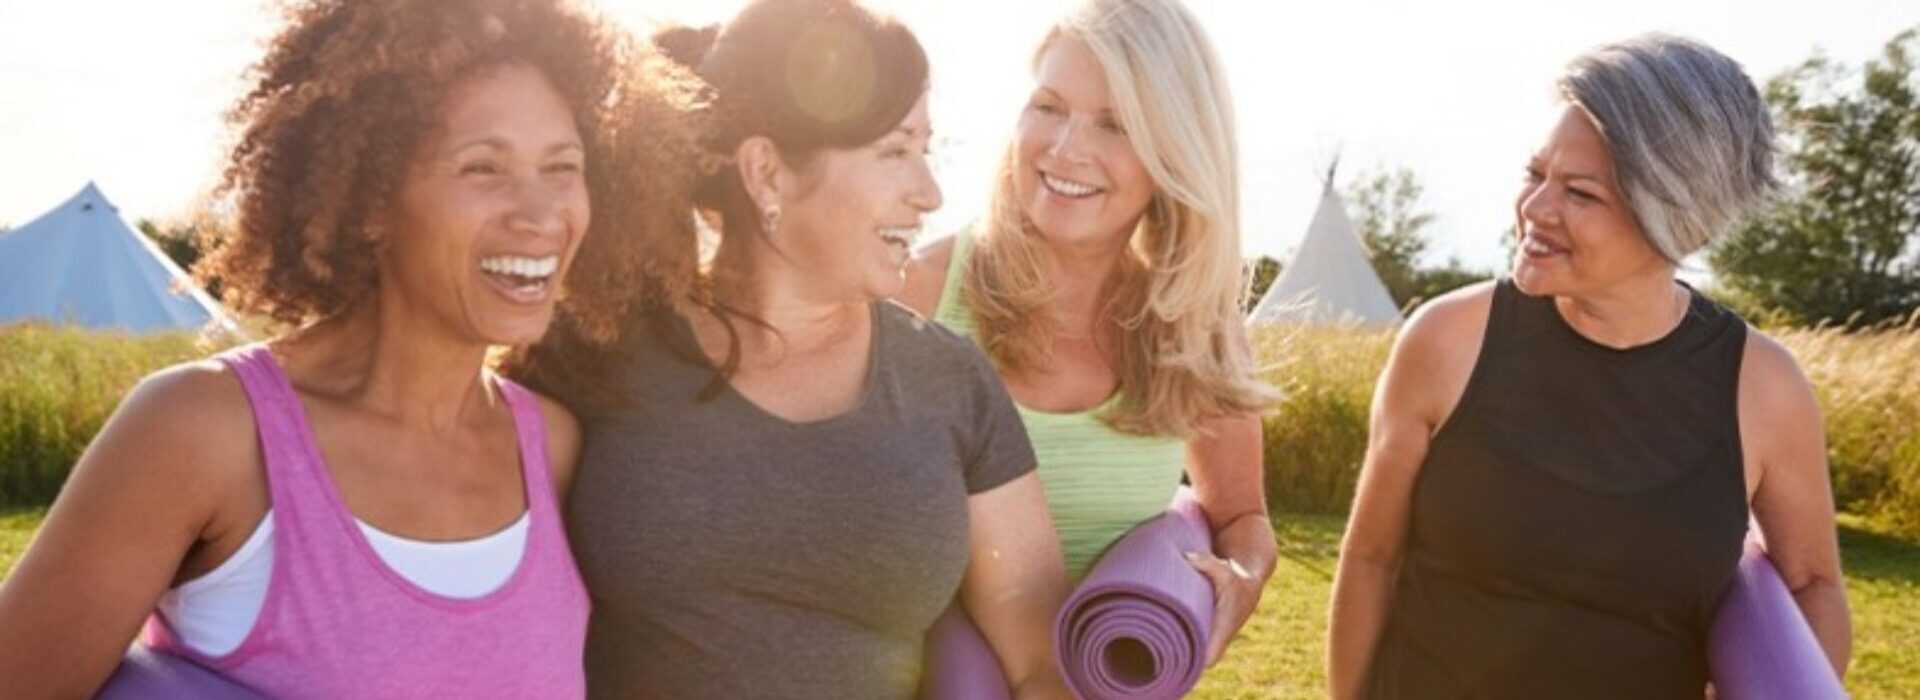 dr keri brown women with yoga mates looking for natural health